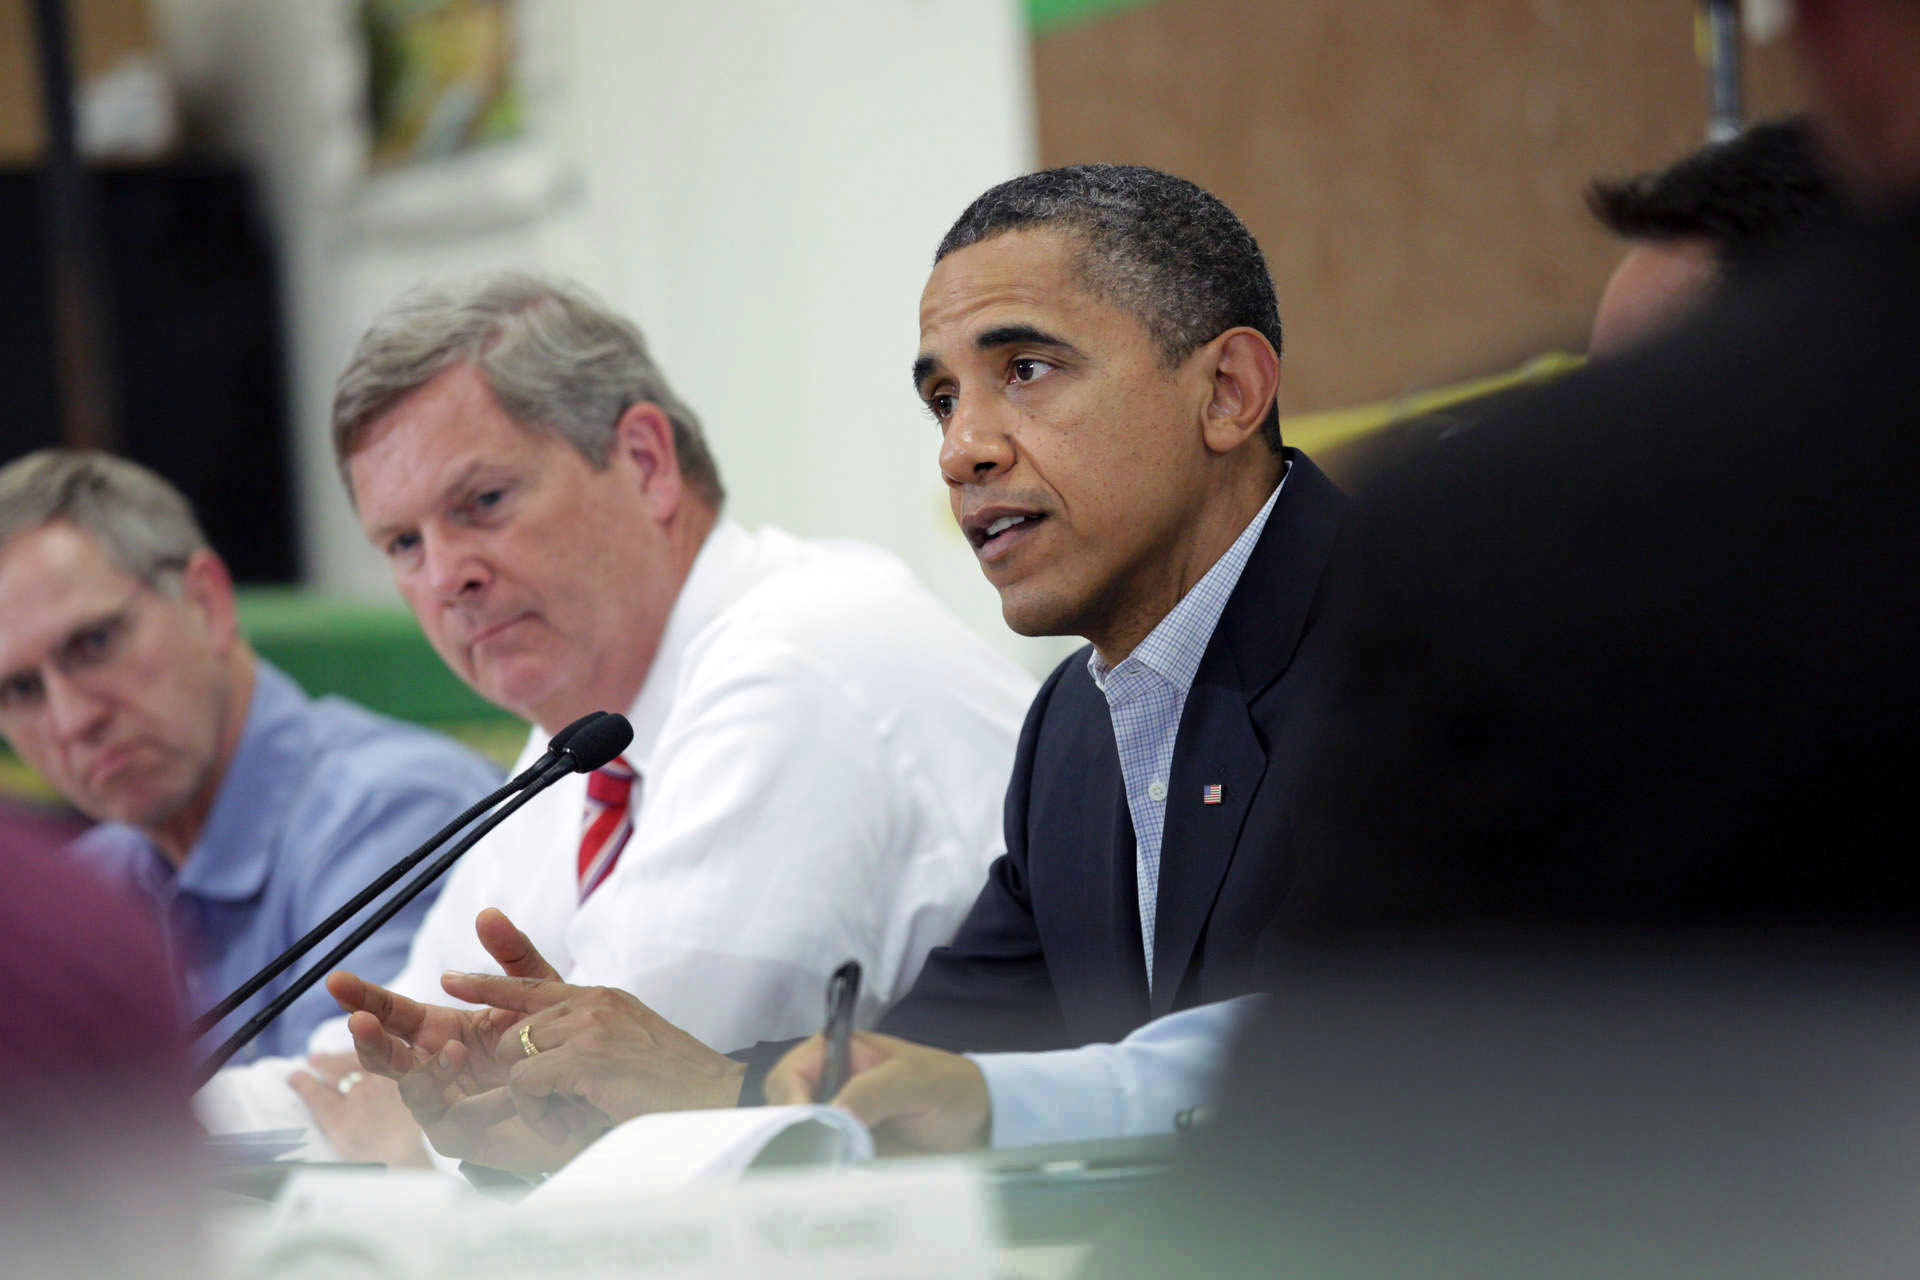 President Obama at a Breakout Session during the White House Rural Economic Forum